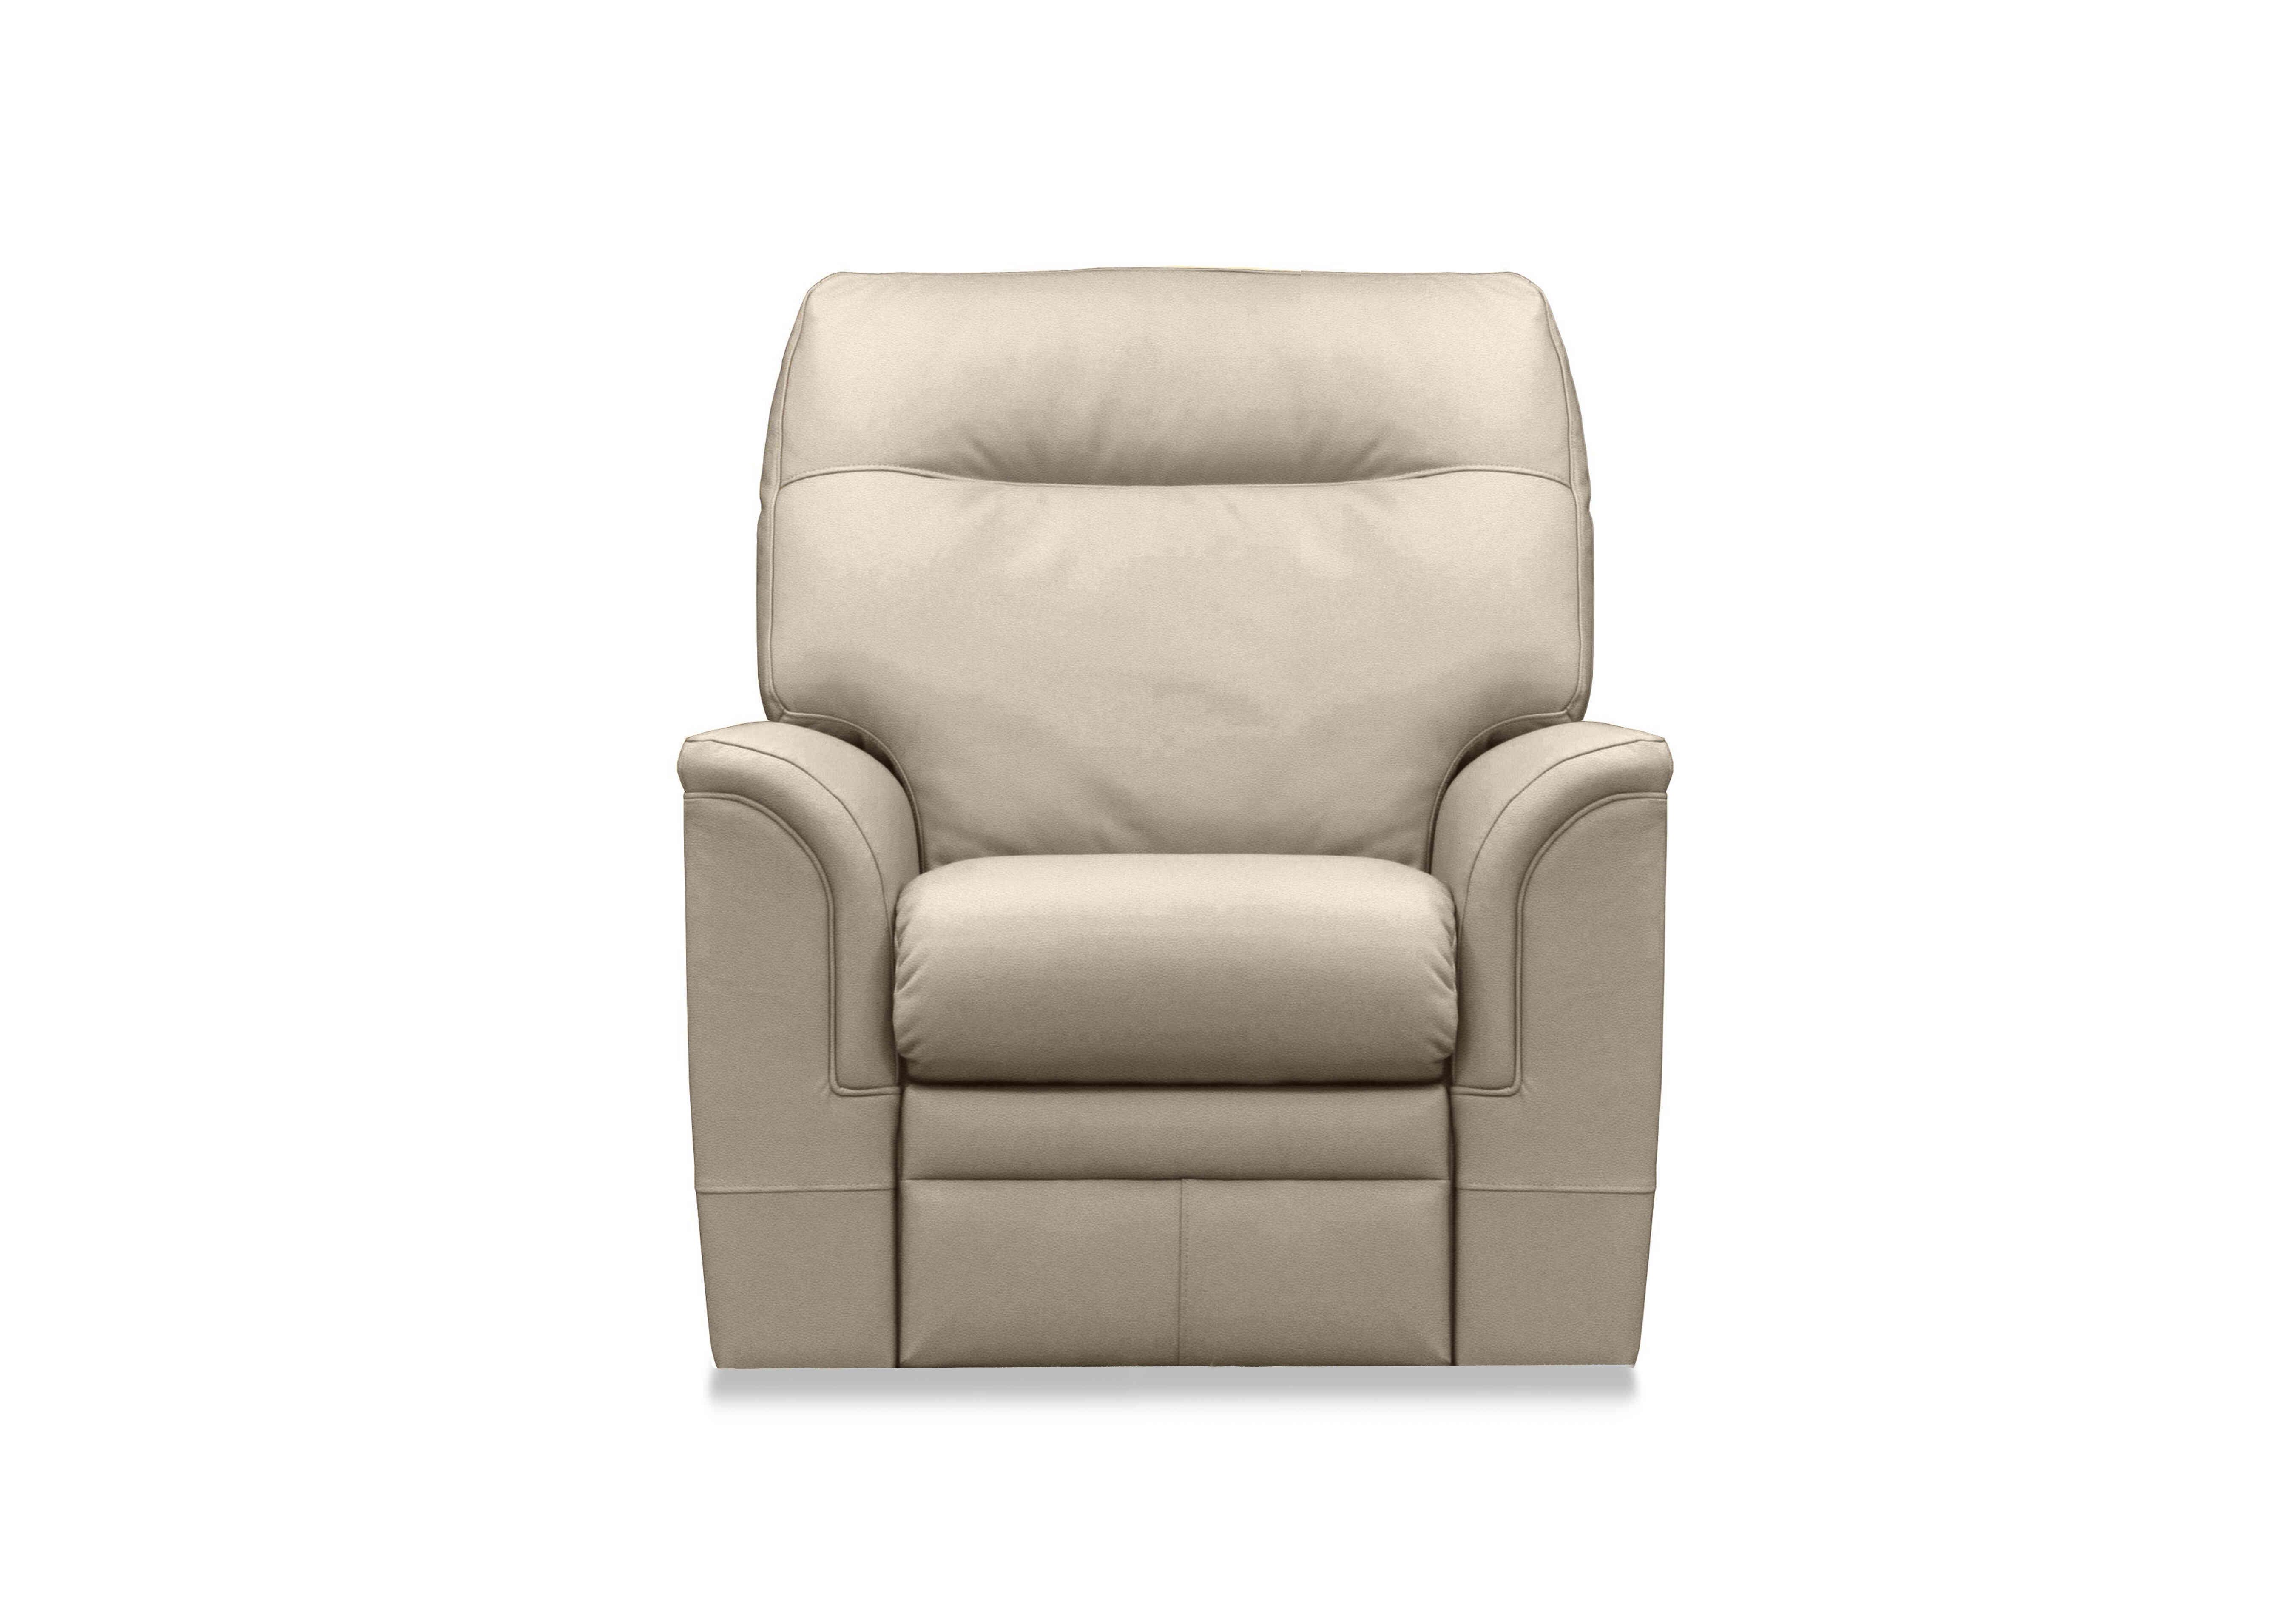 Hudson 23 Leather Lift and Rise Chair in Como Taupe 0053051-0019 on Furniture Village